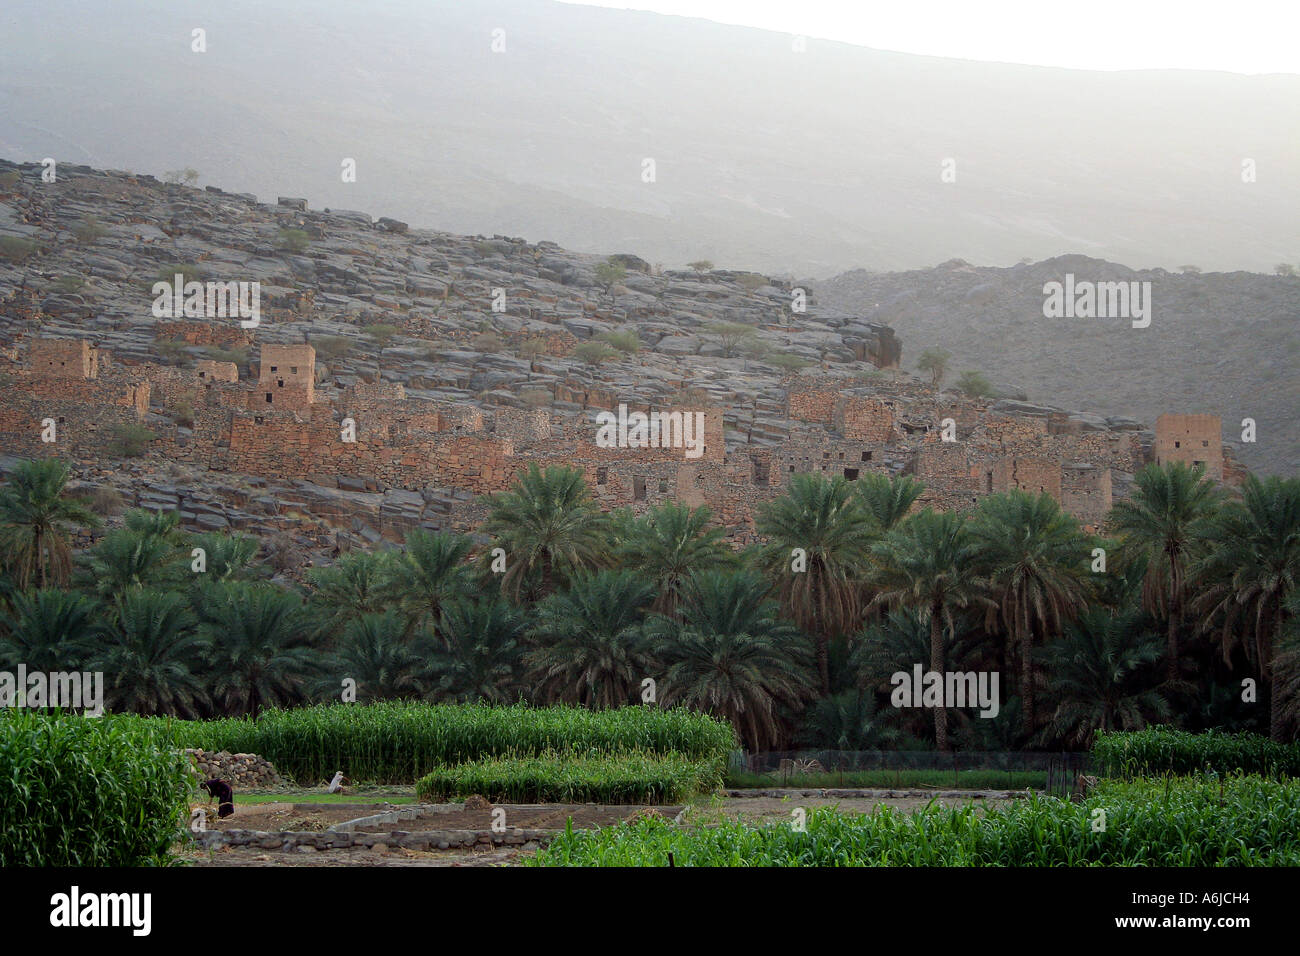 Wadi Ghul, deserted town above planted fields, Oman Stock Photo